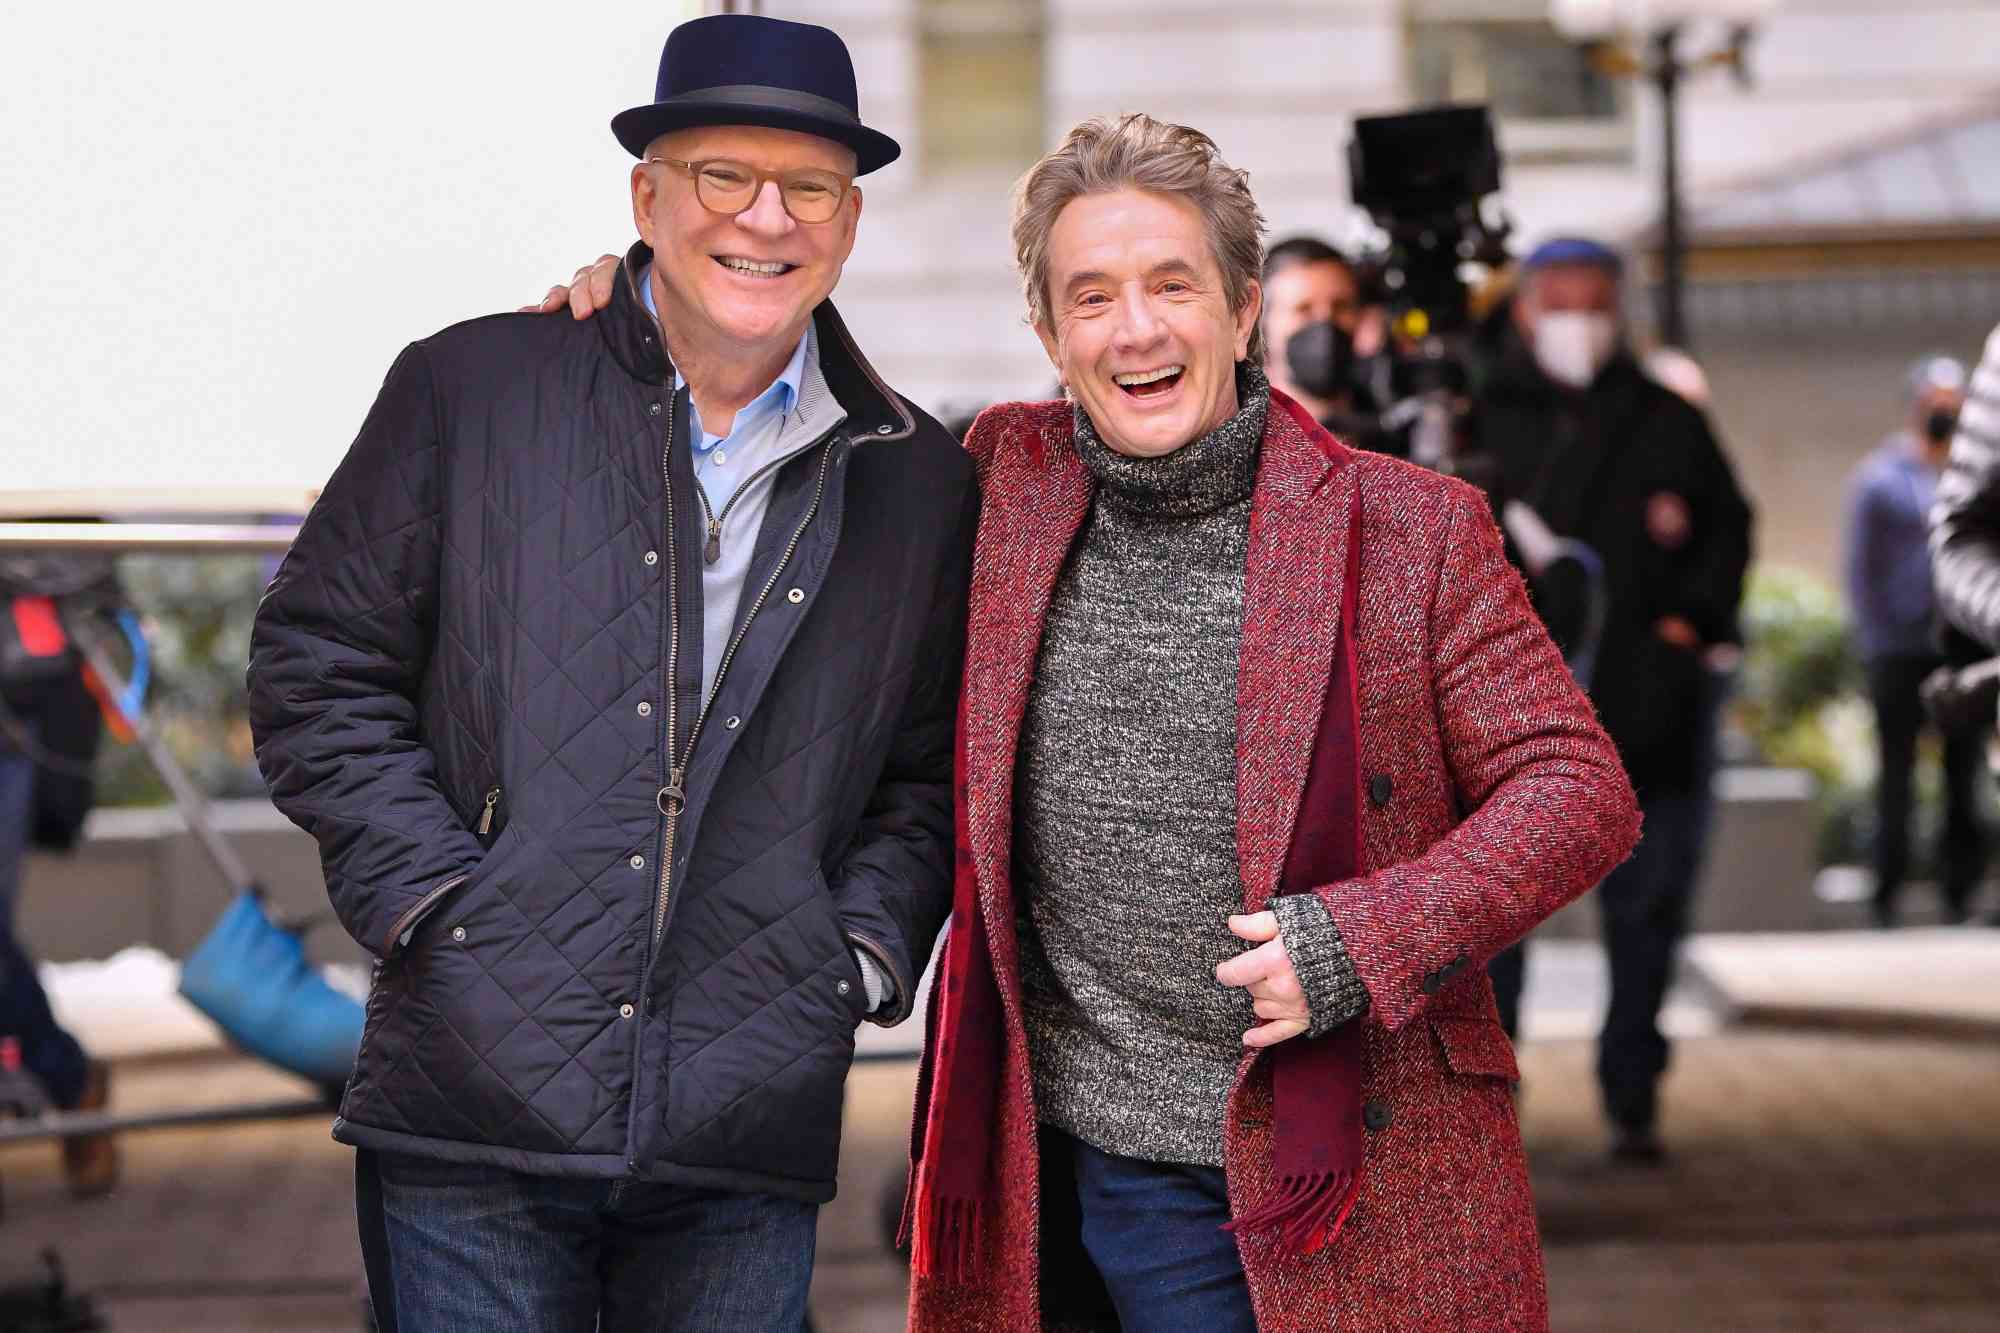 NEW YORK, NY - FEBRUARY 24: Steve Martin and Martin Short seen on the set of 'Only Murders in the Building' in Manhattan on February 24, 2021 in New York City. (Photo by James Devaney/GC Images)